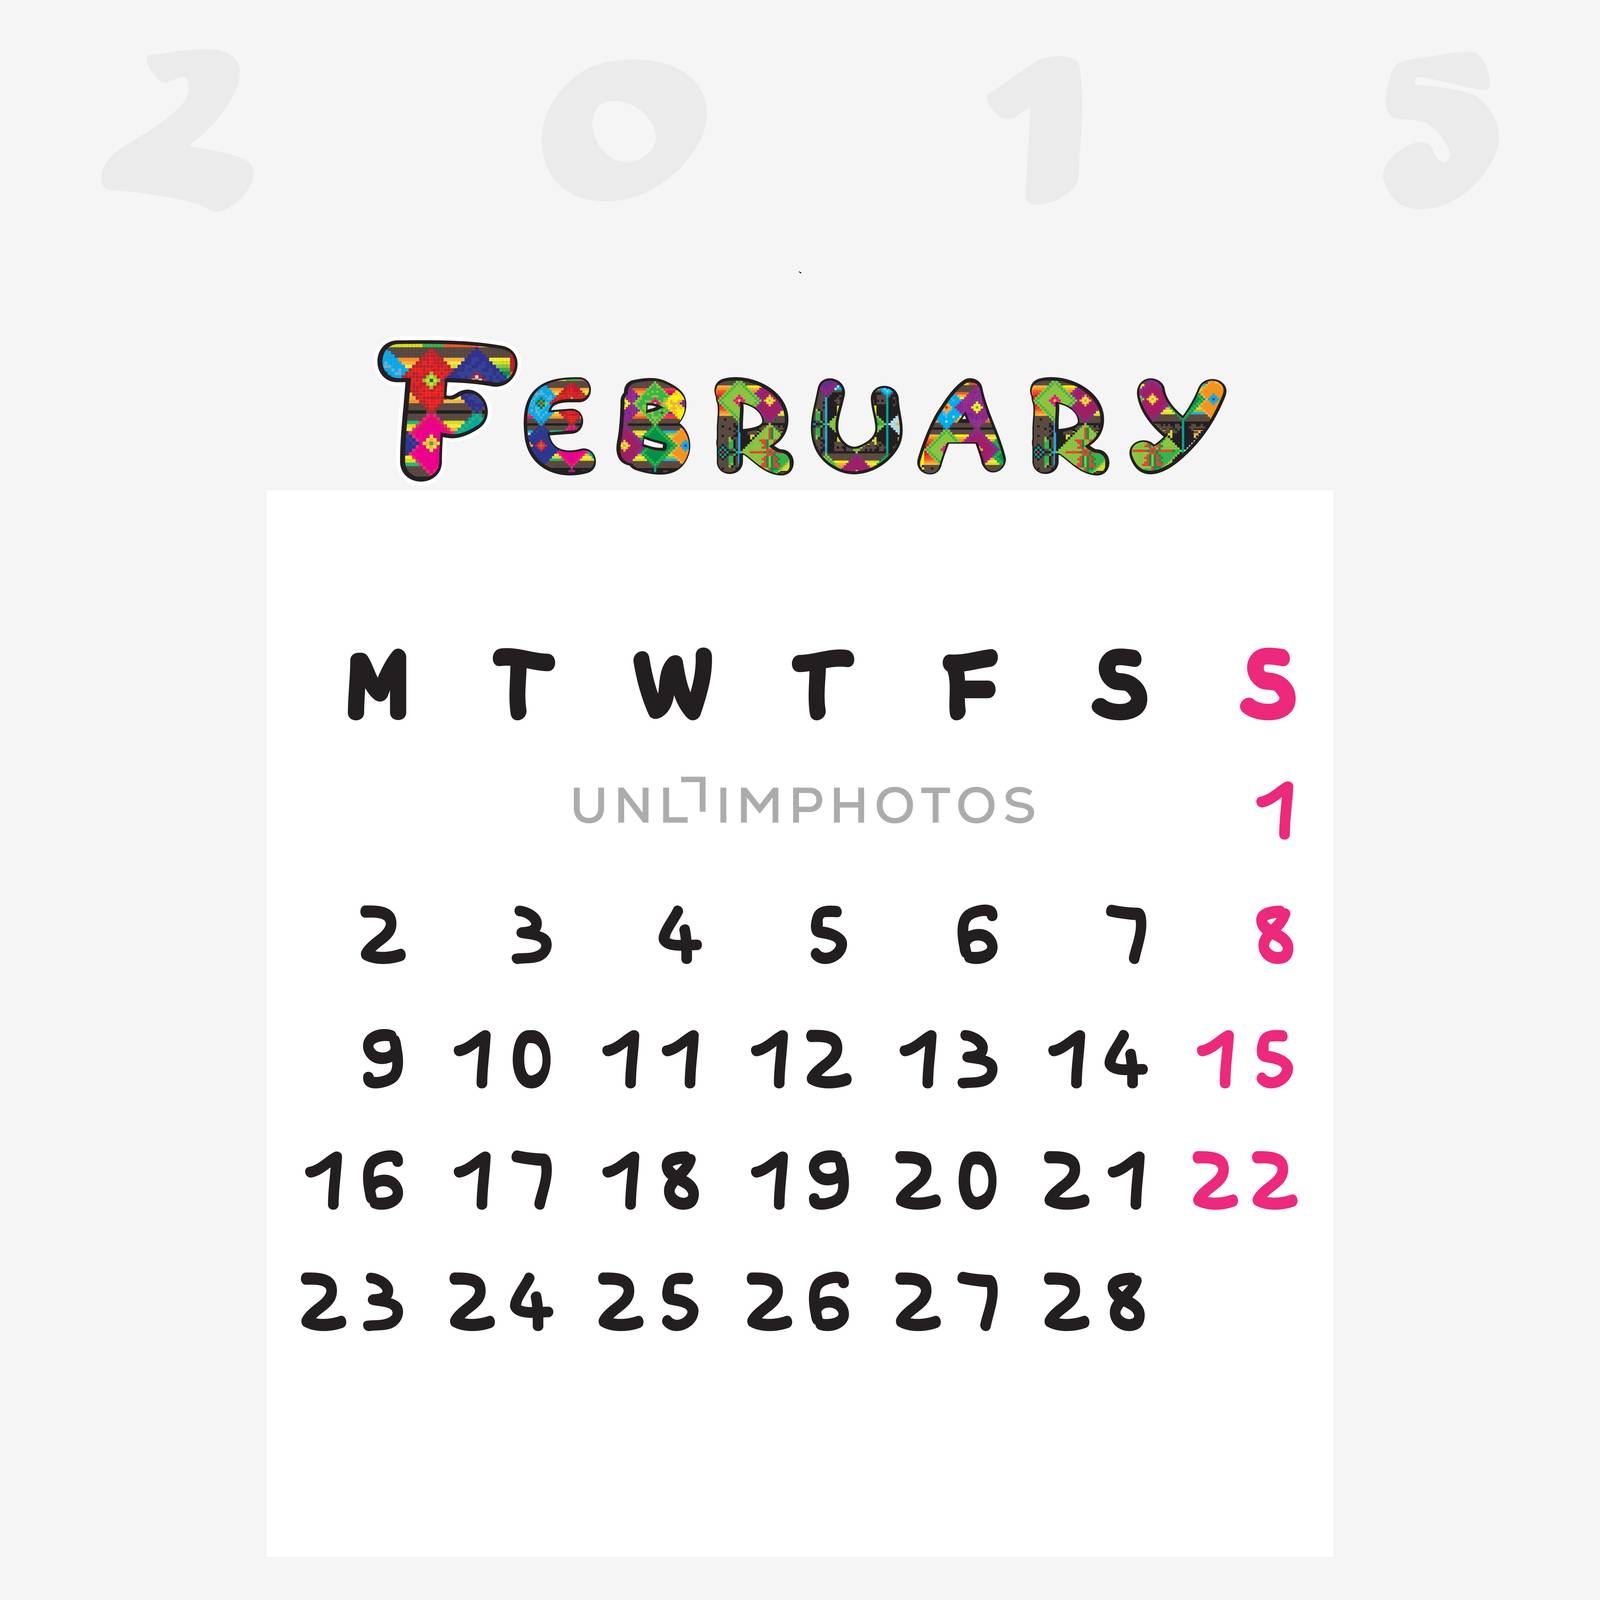 Calendar 2015, graphic illustration of February monthly calendar with original hand drawn text and colored capital letters for kids